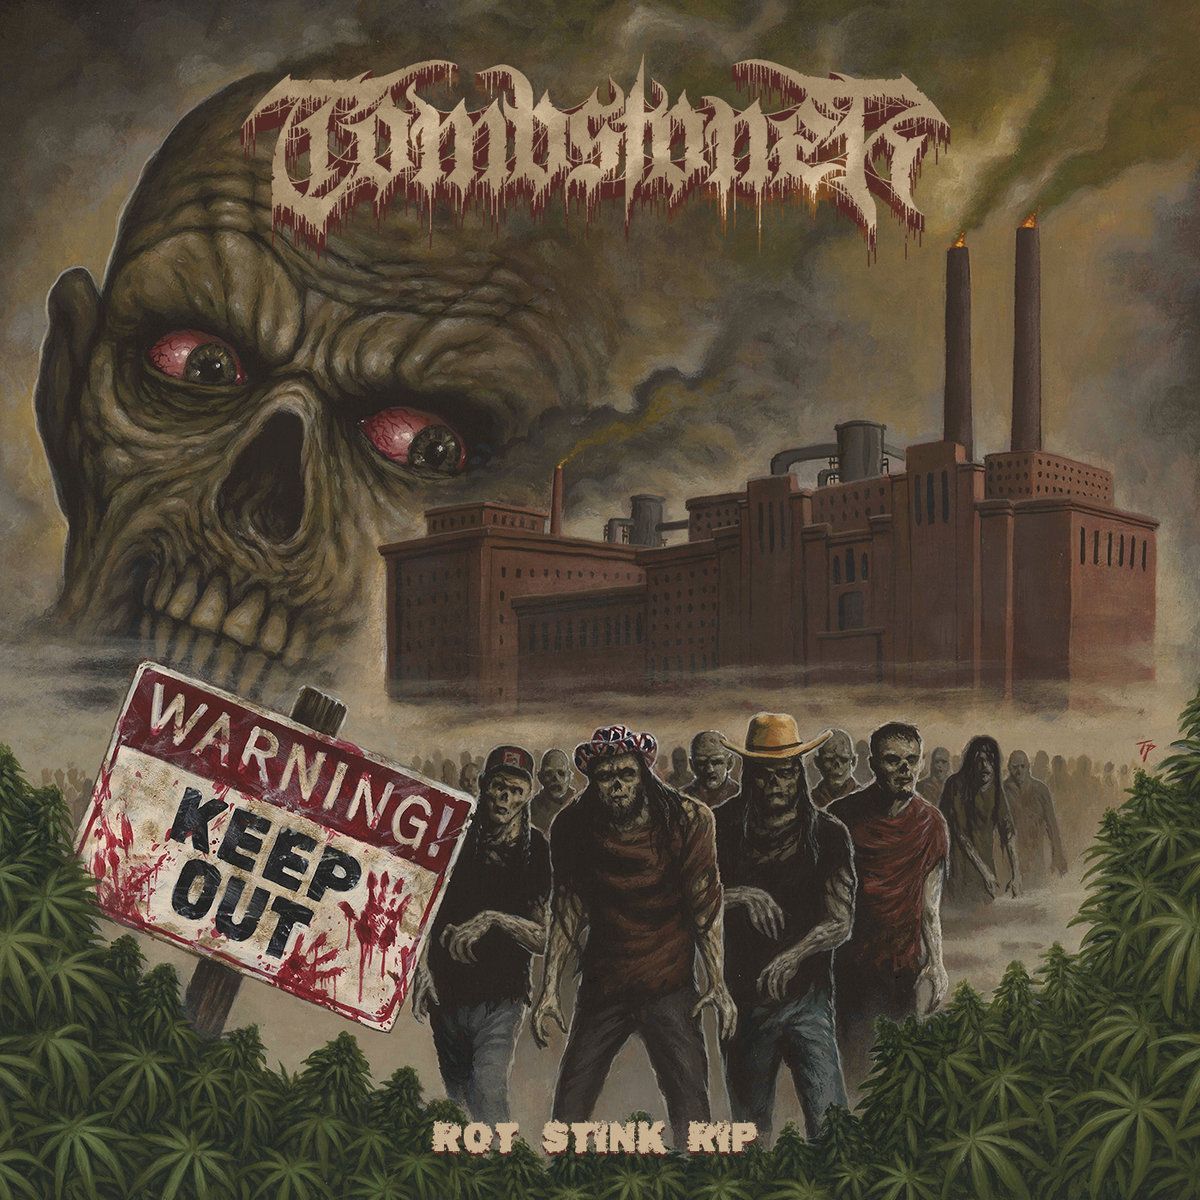 Death Metal masters TOMBSTONER released their new album 'Rot Stink Rip' on Apr 26, 2024 via Redefining Darkness Records. What do you think of new album? #tombstoner #rotstinkrip #deathmetal #brutaldeathmetal #heavymetal #metaltwitter #metalmusic #metal #goregrind @RedefiningDark